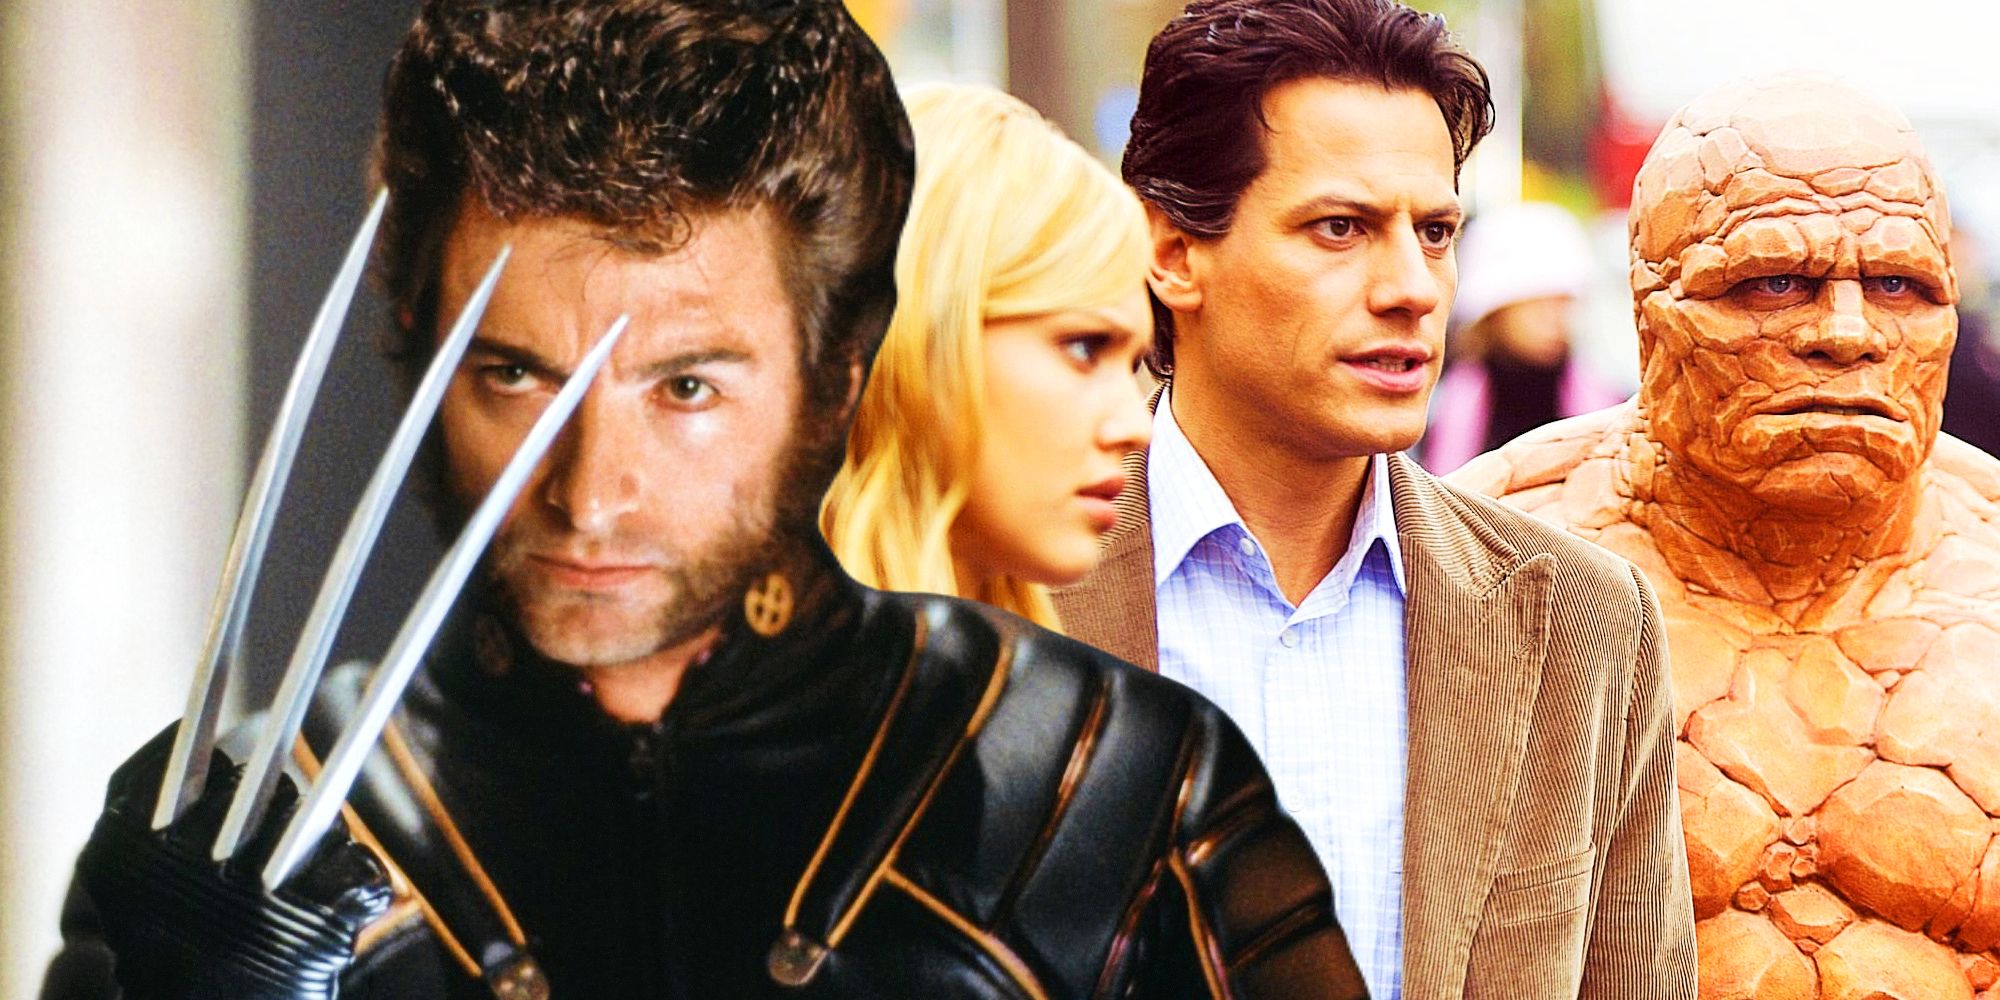 Hugh Jackman as Wolverine and the Fantastic Four